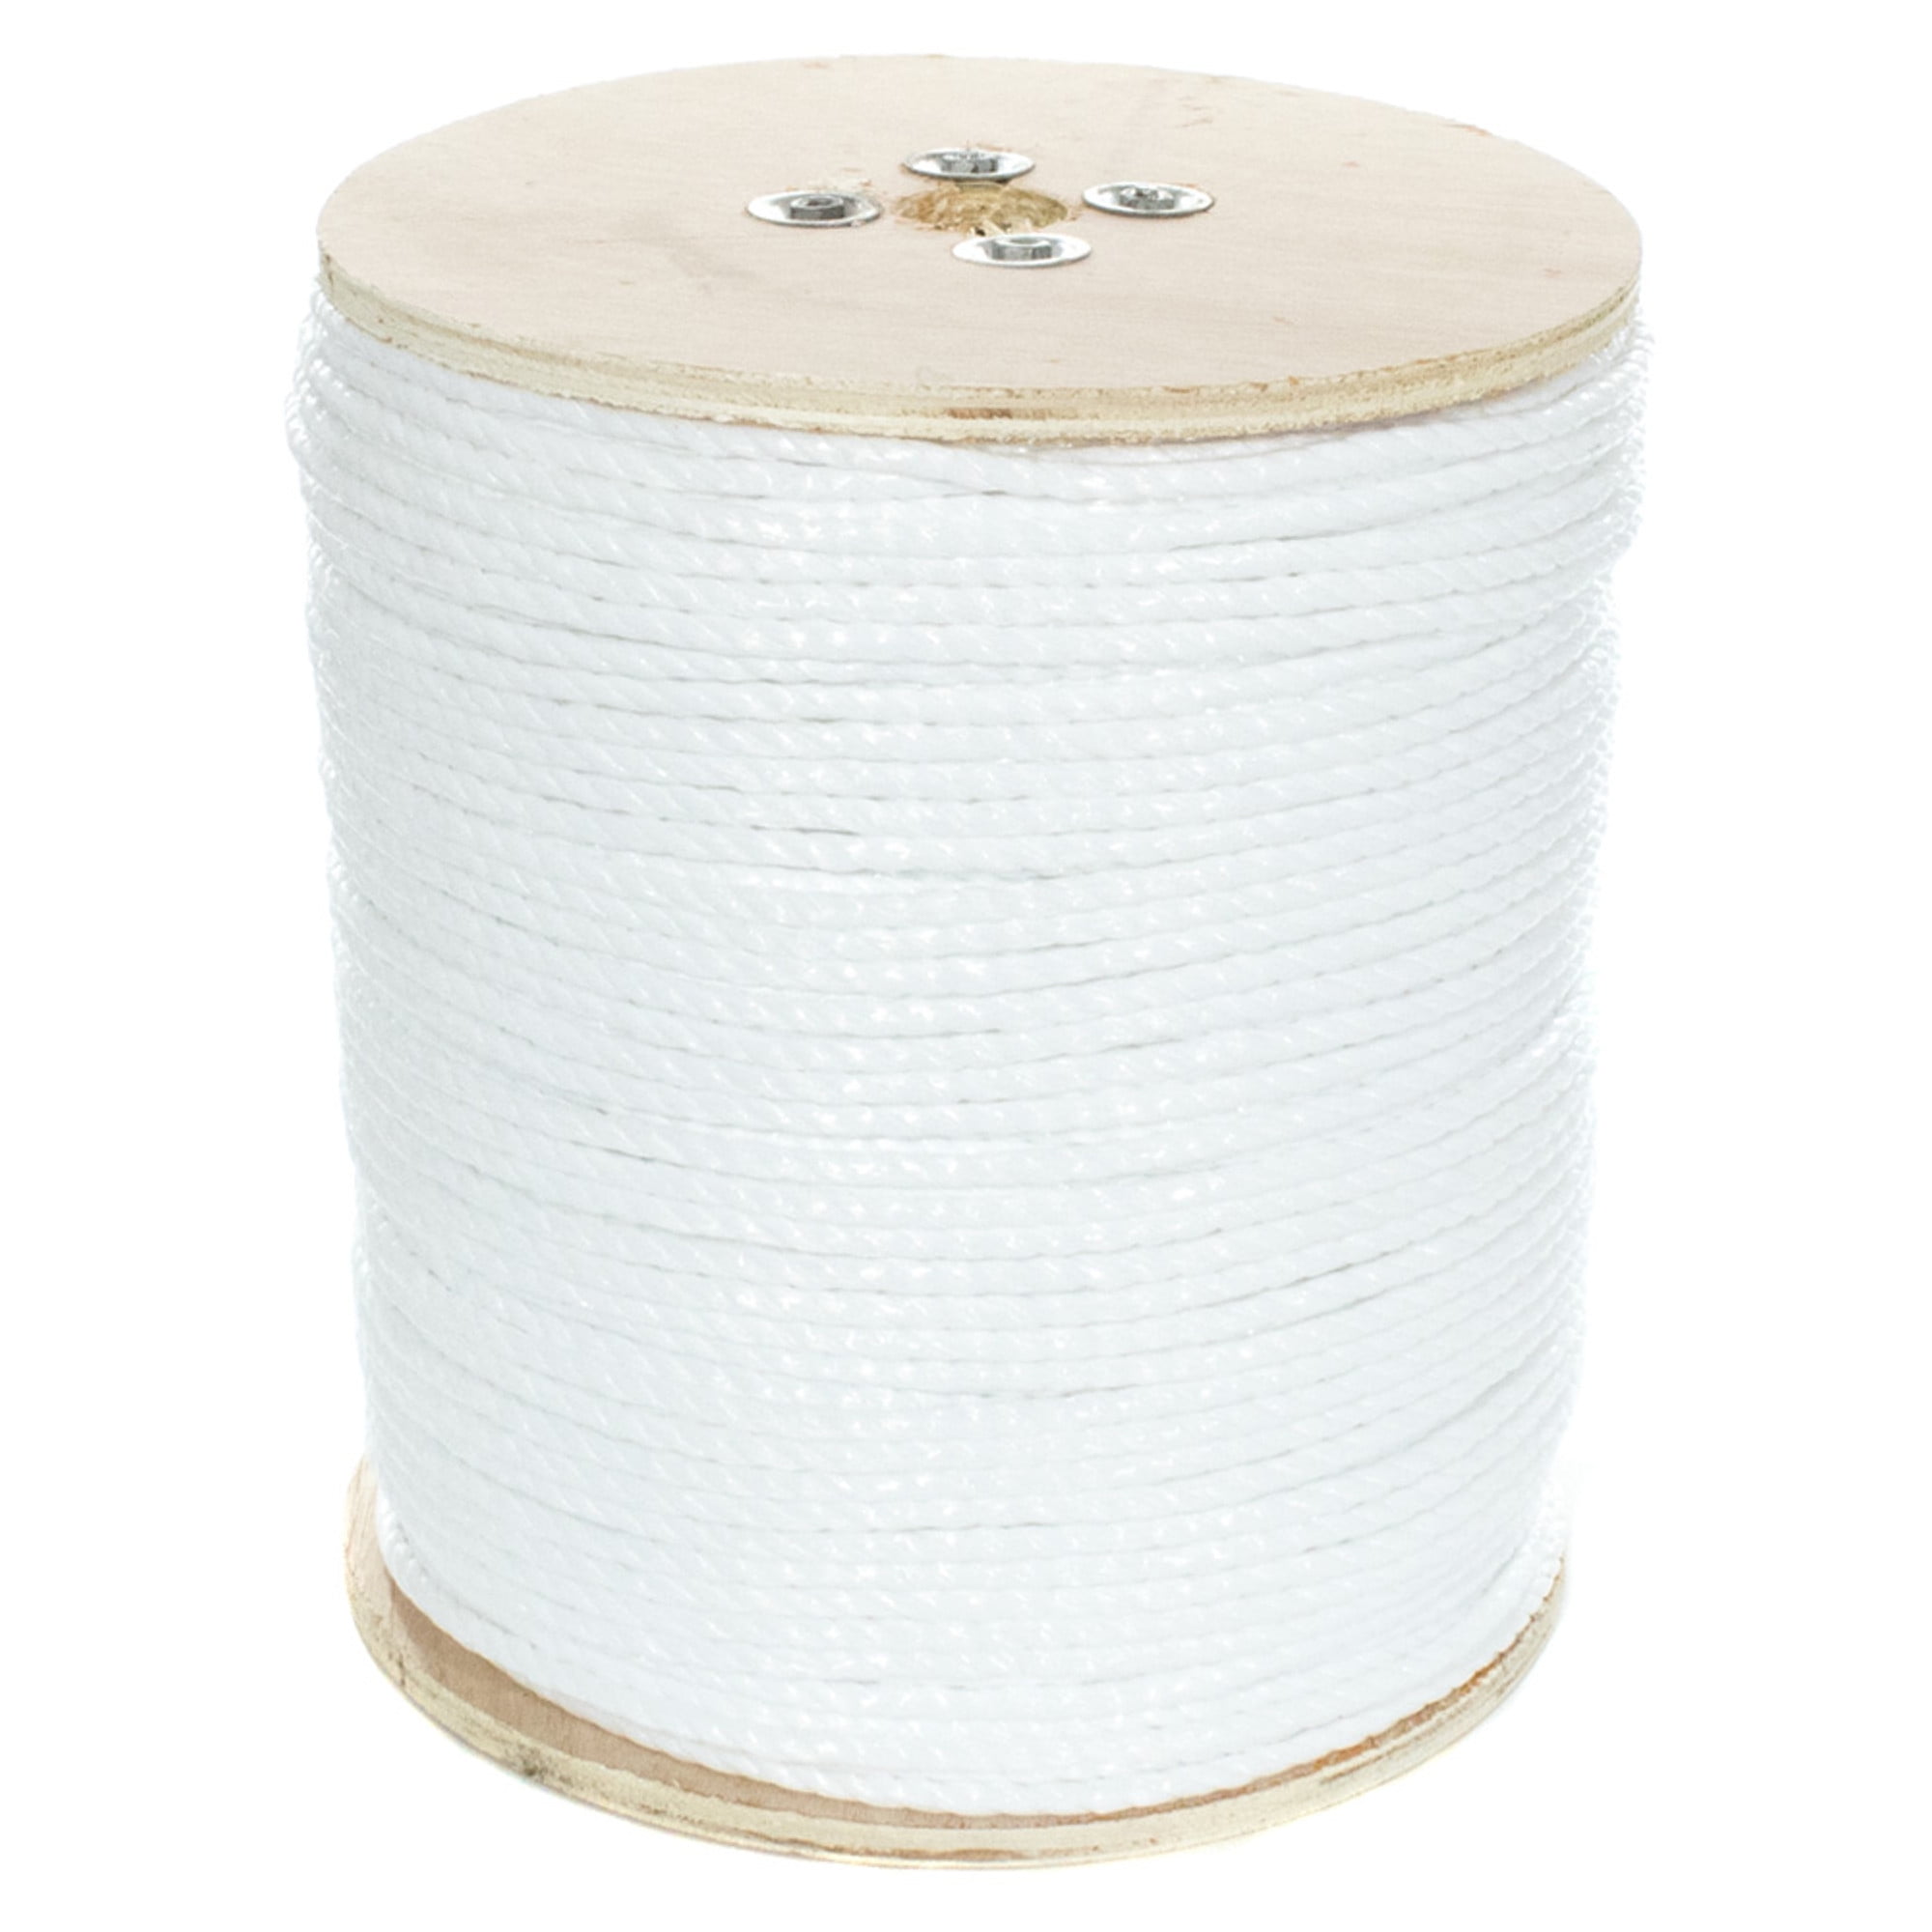 Lehigh Group PT8100HD White Twisted Polypropylene Floating Rope 3/8 in.x100 ft. 